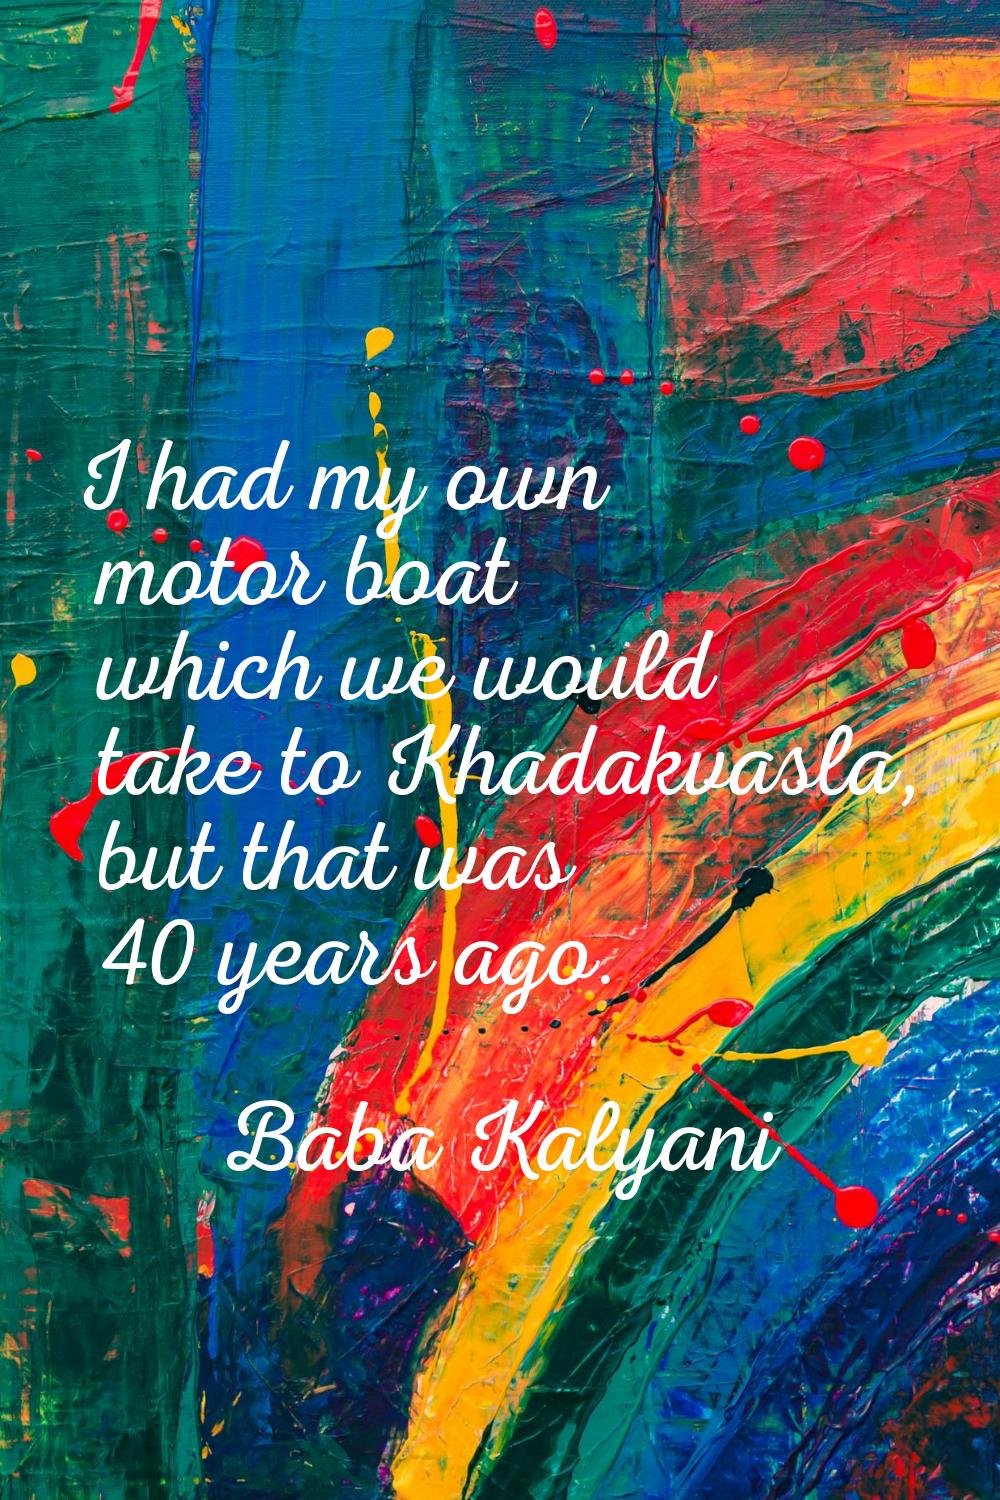 I had my own motor boat which we would take to Khadakvasla, but that was 40 years ago.